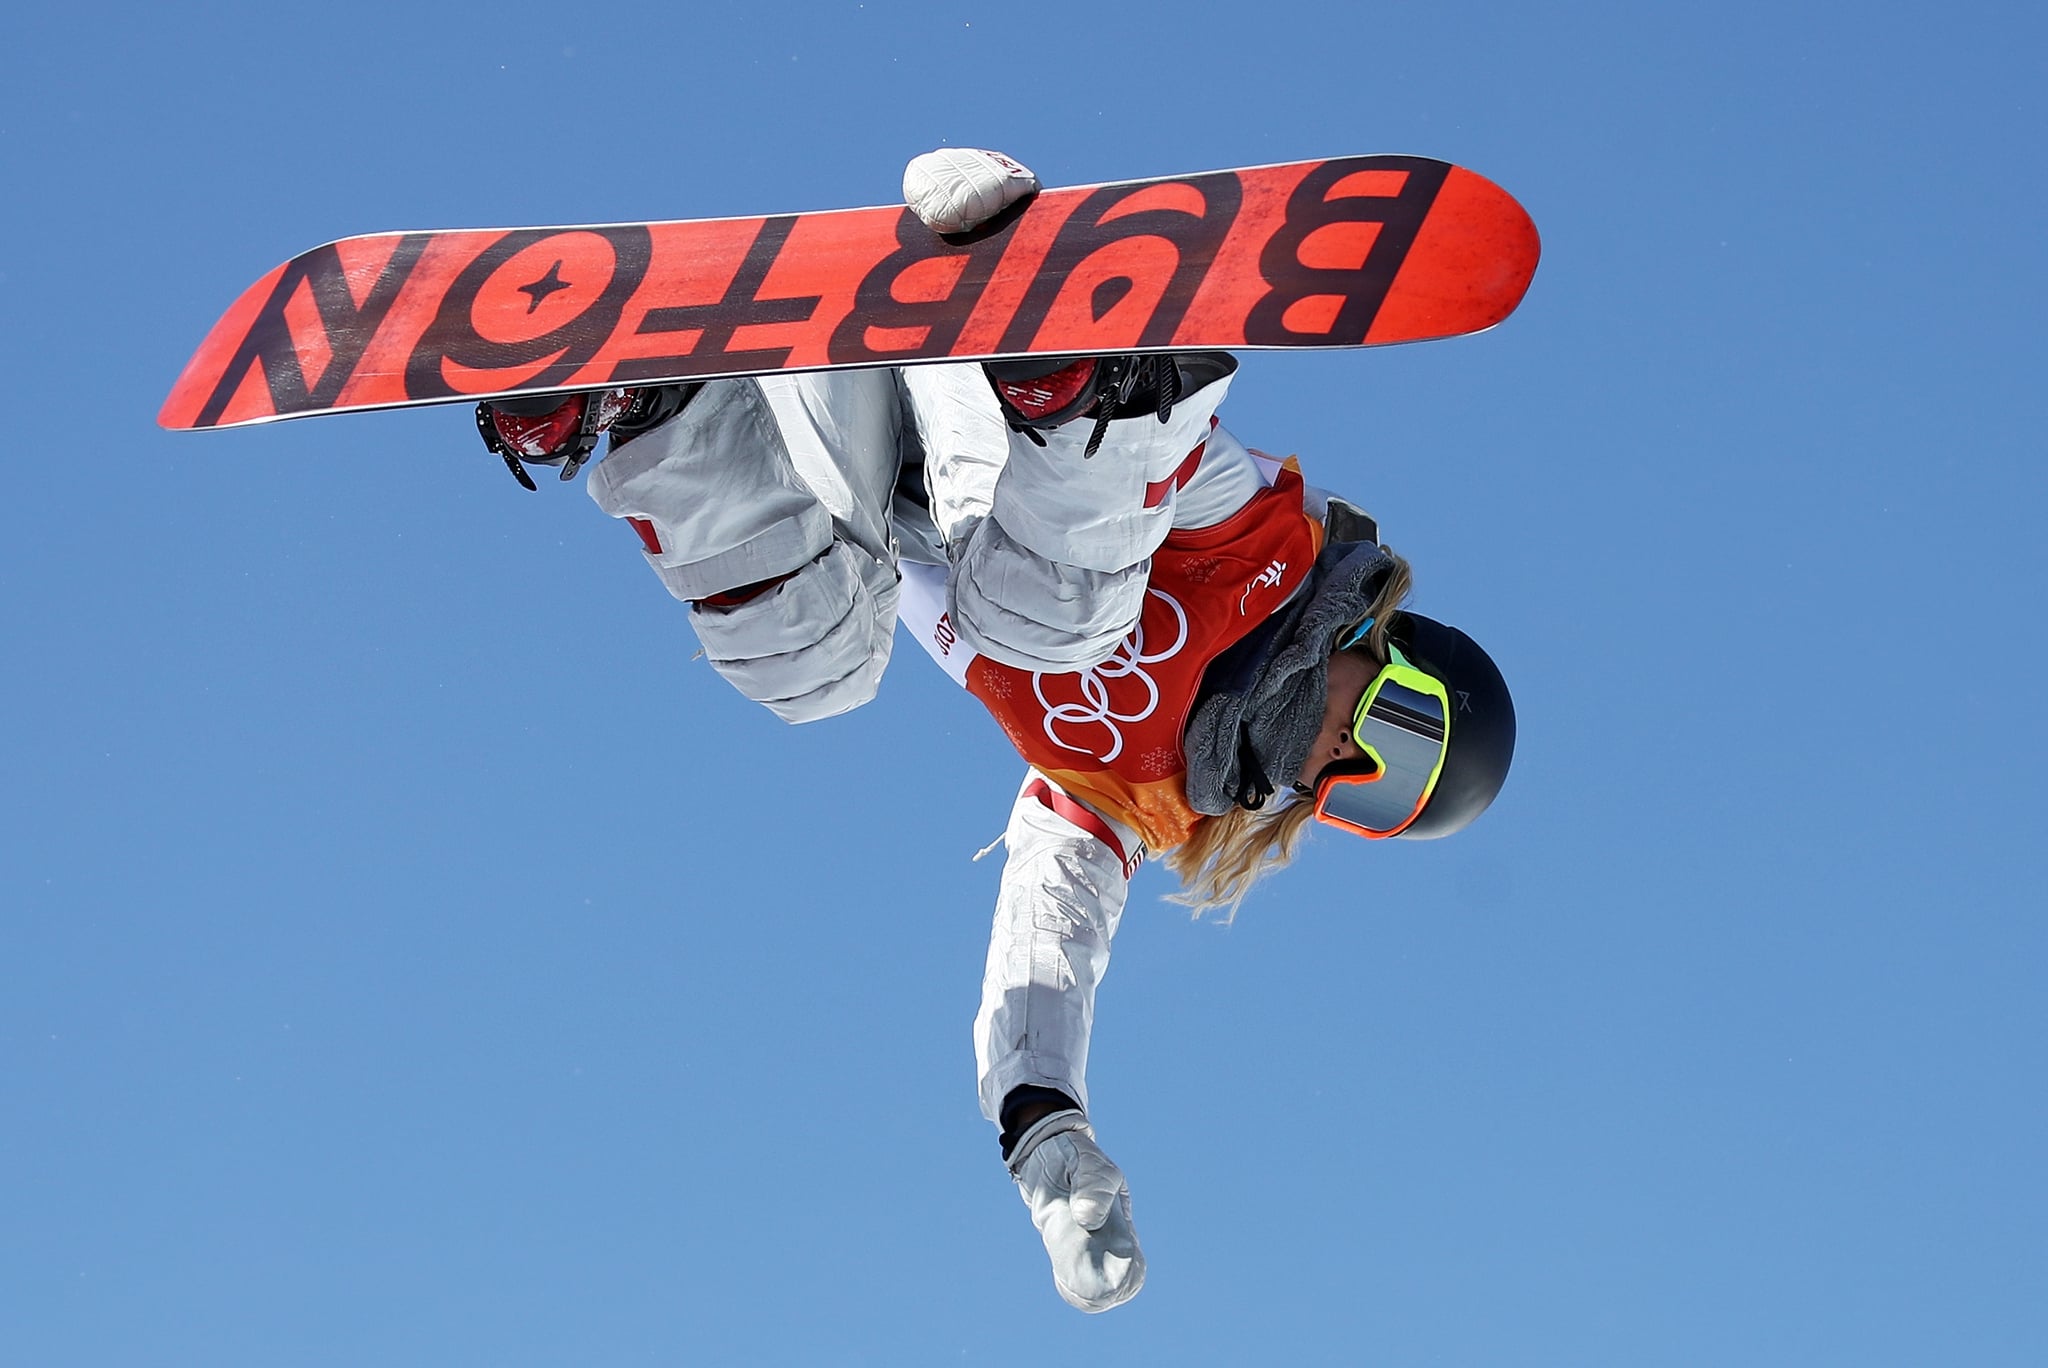 PYEONGCHANG-GUN, SOUTH KOREA - FEBRUARY 13:  Chloe Kim of the United States competes during the Snowboard Ladies' Halfpipe Final on day four of the PyeongChang 2018 Winter Olympic Games at Phoenix Snow Park on February 13, 2018 in Pyeongchang-gun, South Korea.  (Photo by Cameron Spencer/Getty Images)